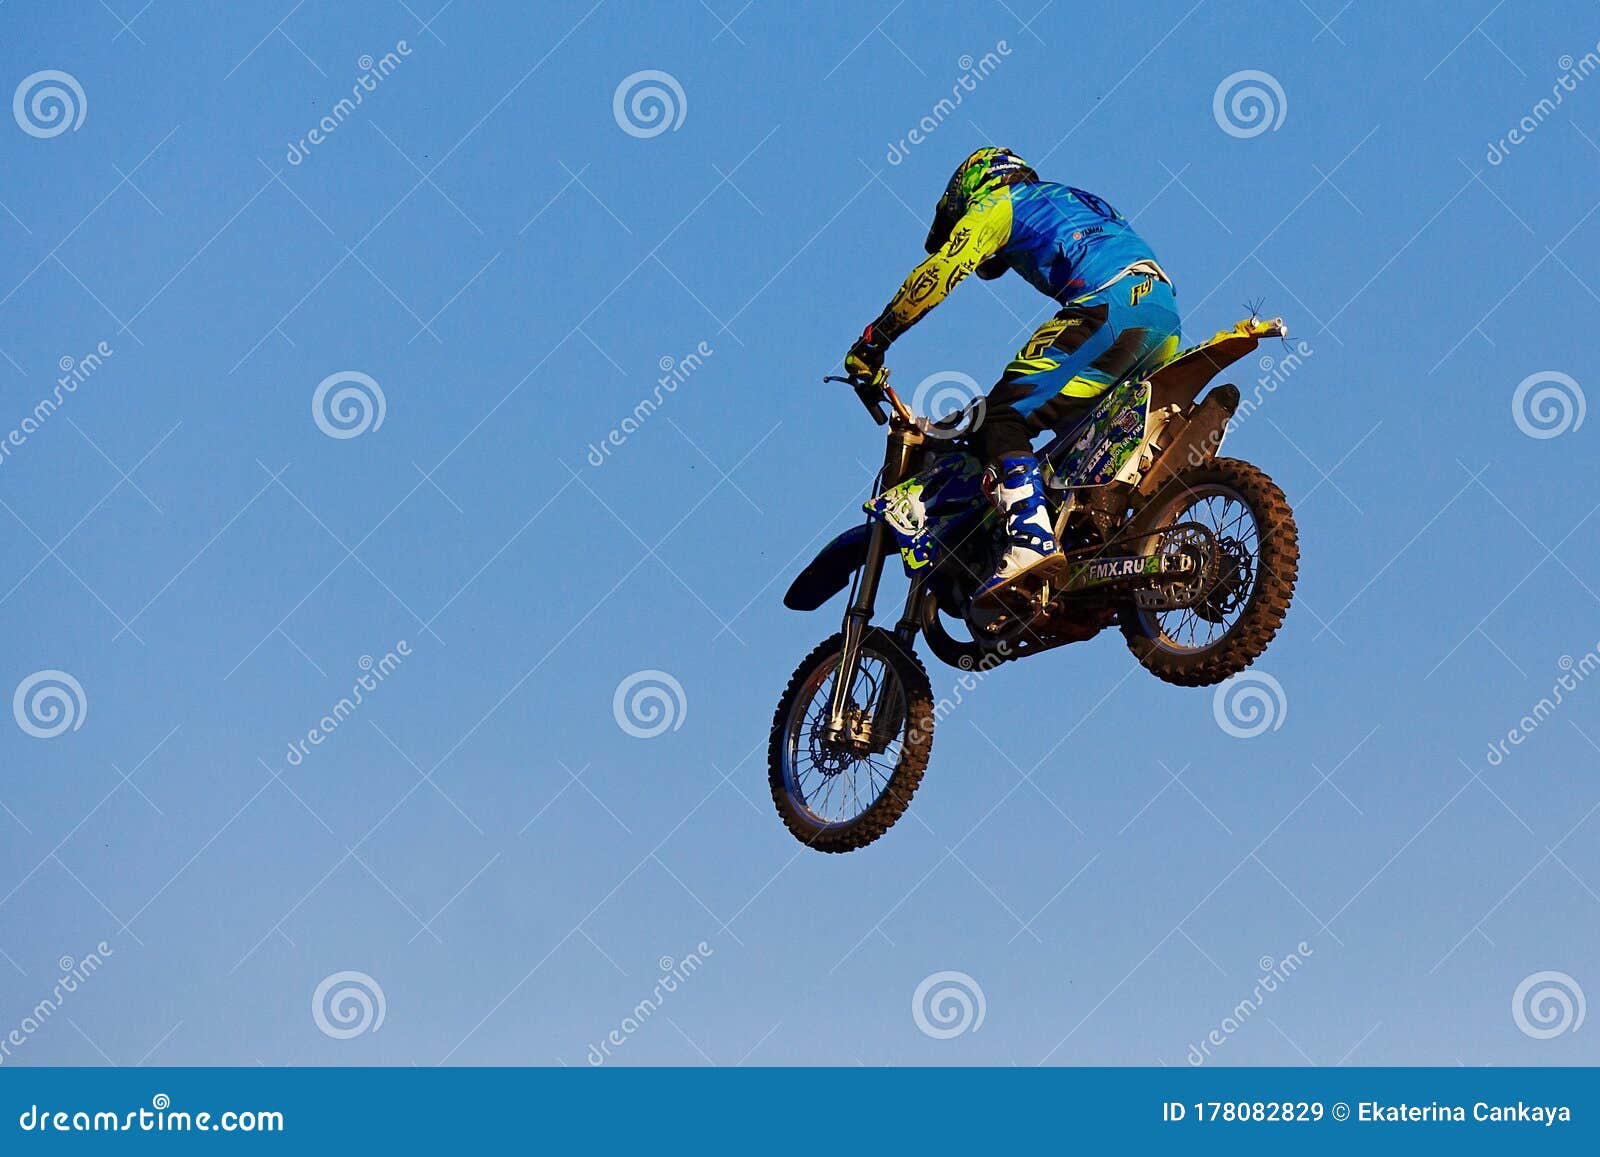 Moscow Russia September 23 17 Pro Motocross Rider Riding Fmx Motorbike Jumping Performing Extreme Stunt Professional Editorial Stock Image Image Of Jump Motorcycle